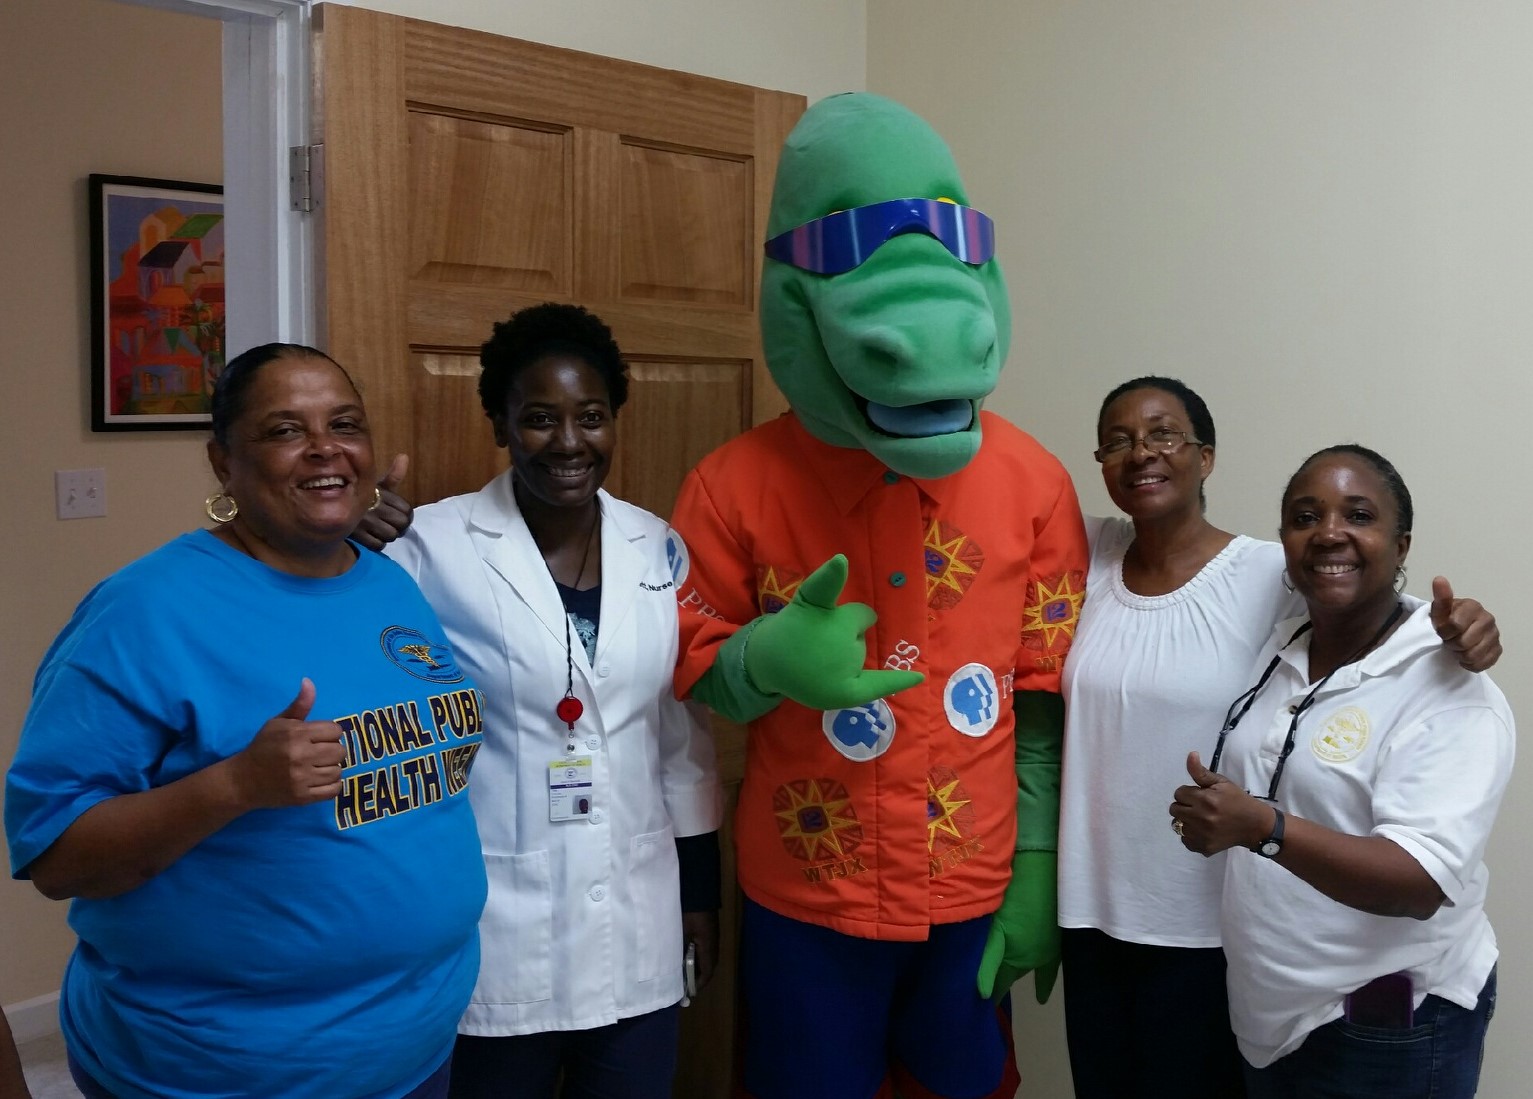 St. Thomas outreach workers with mascot